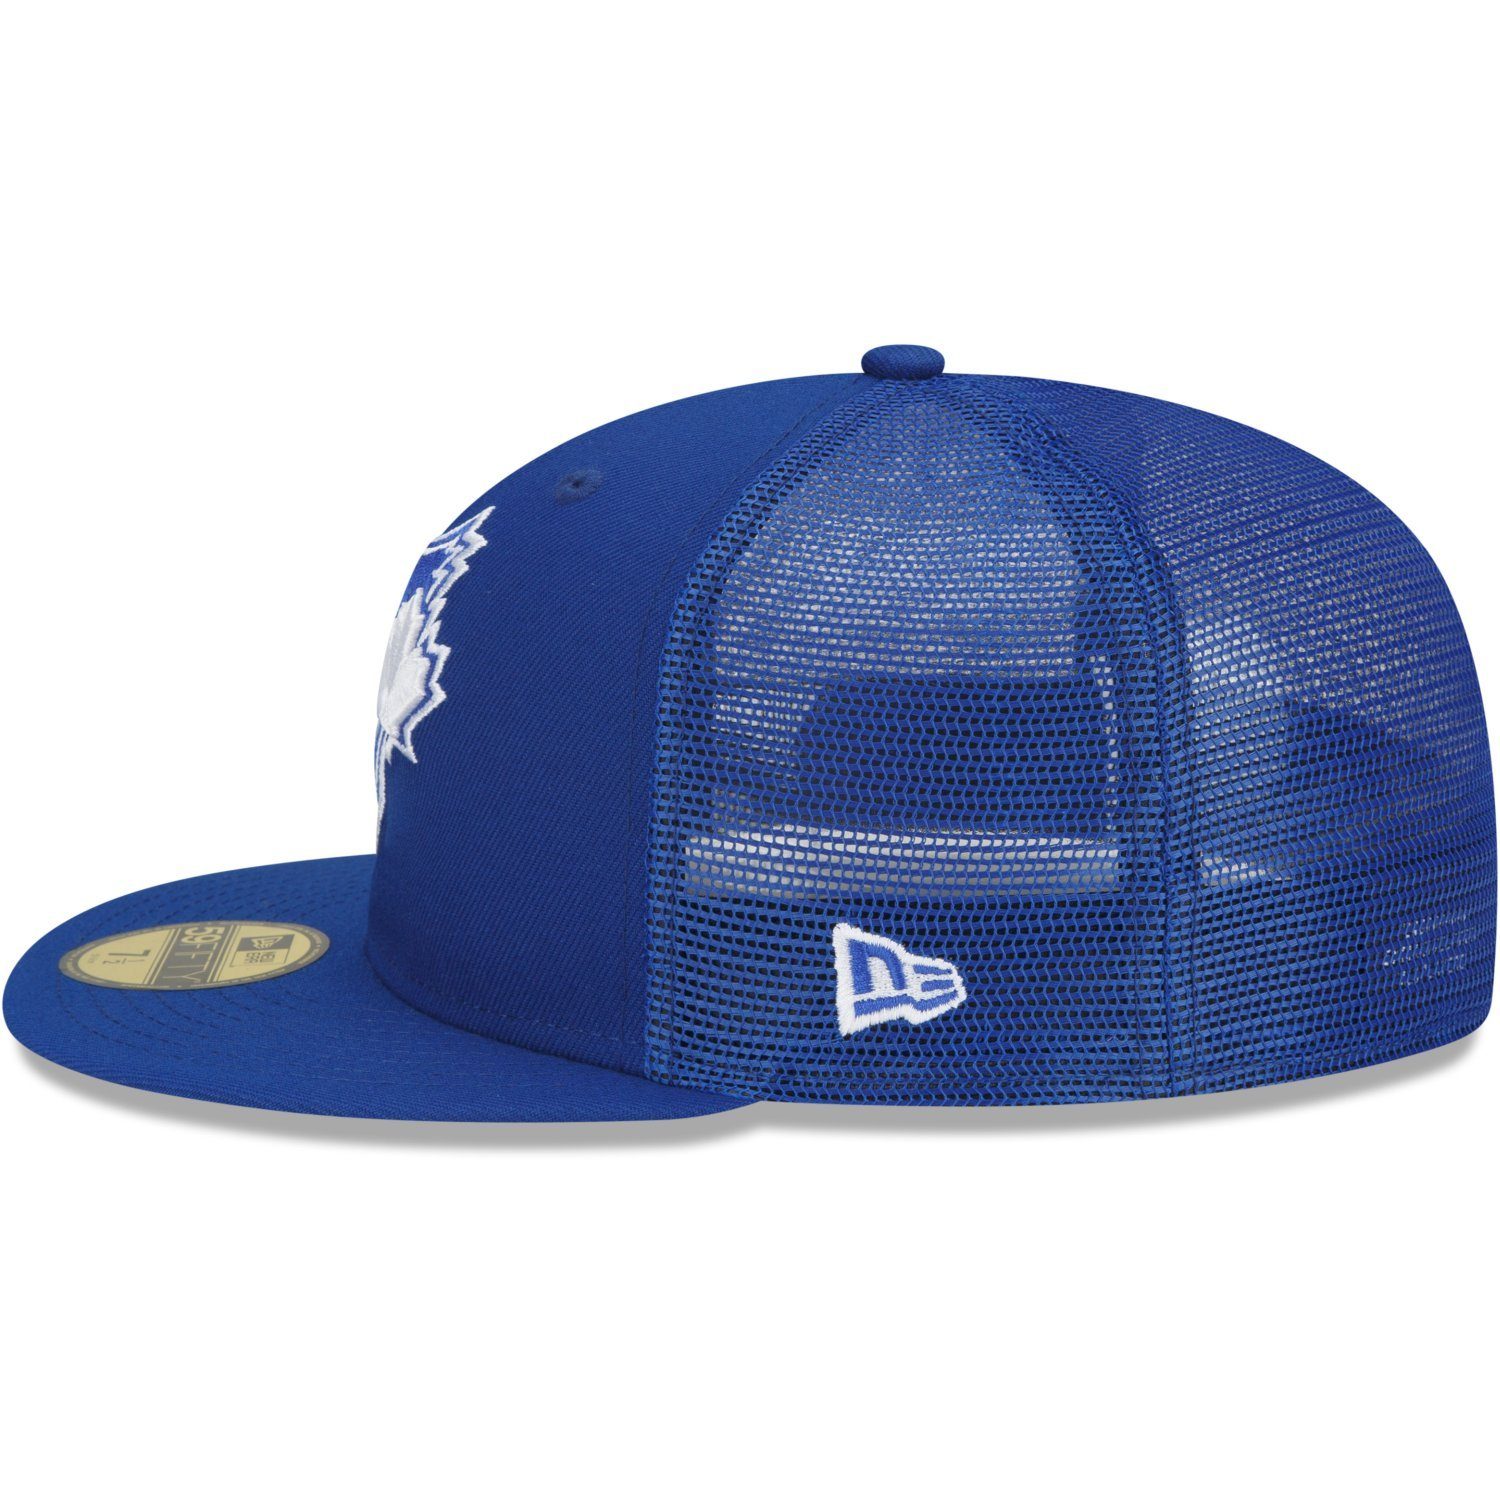 PRACTICE BATTING New Jays Era Toronto Cap Fitted 59Fifty